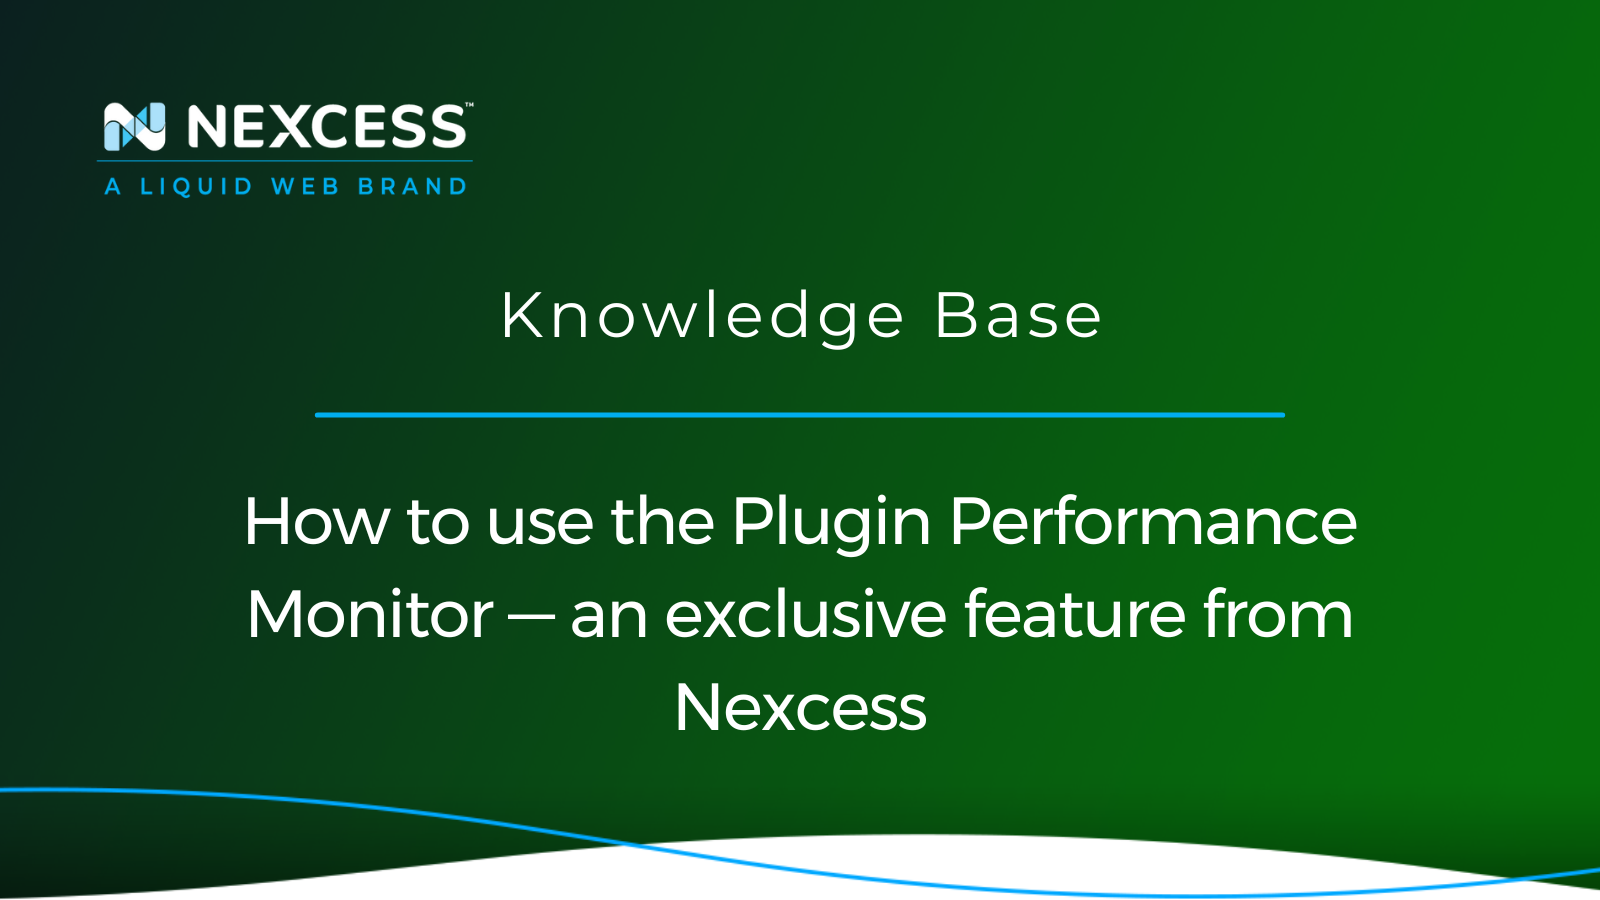 How to use the Plugin Performance Monitor — an exclusive feature from Nexcess